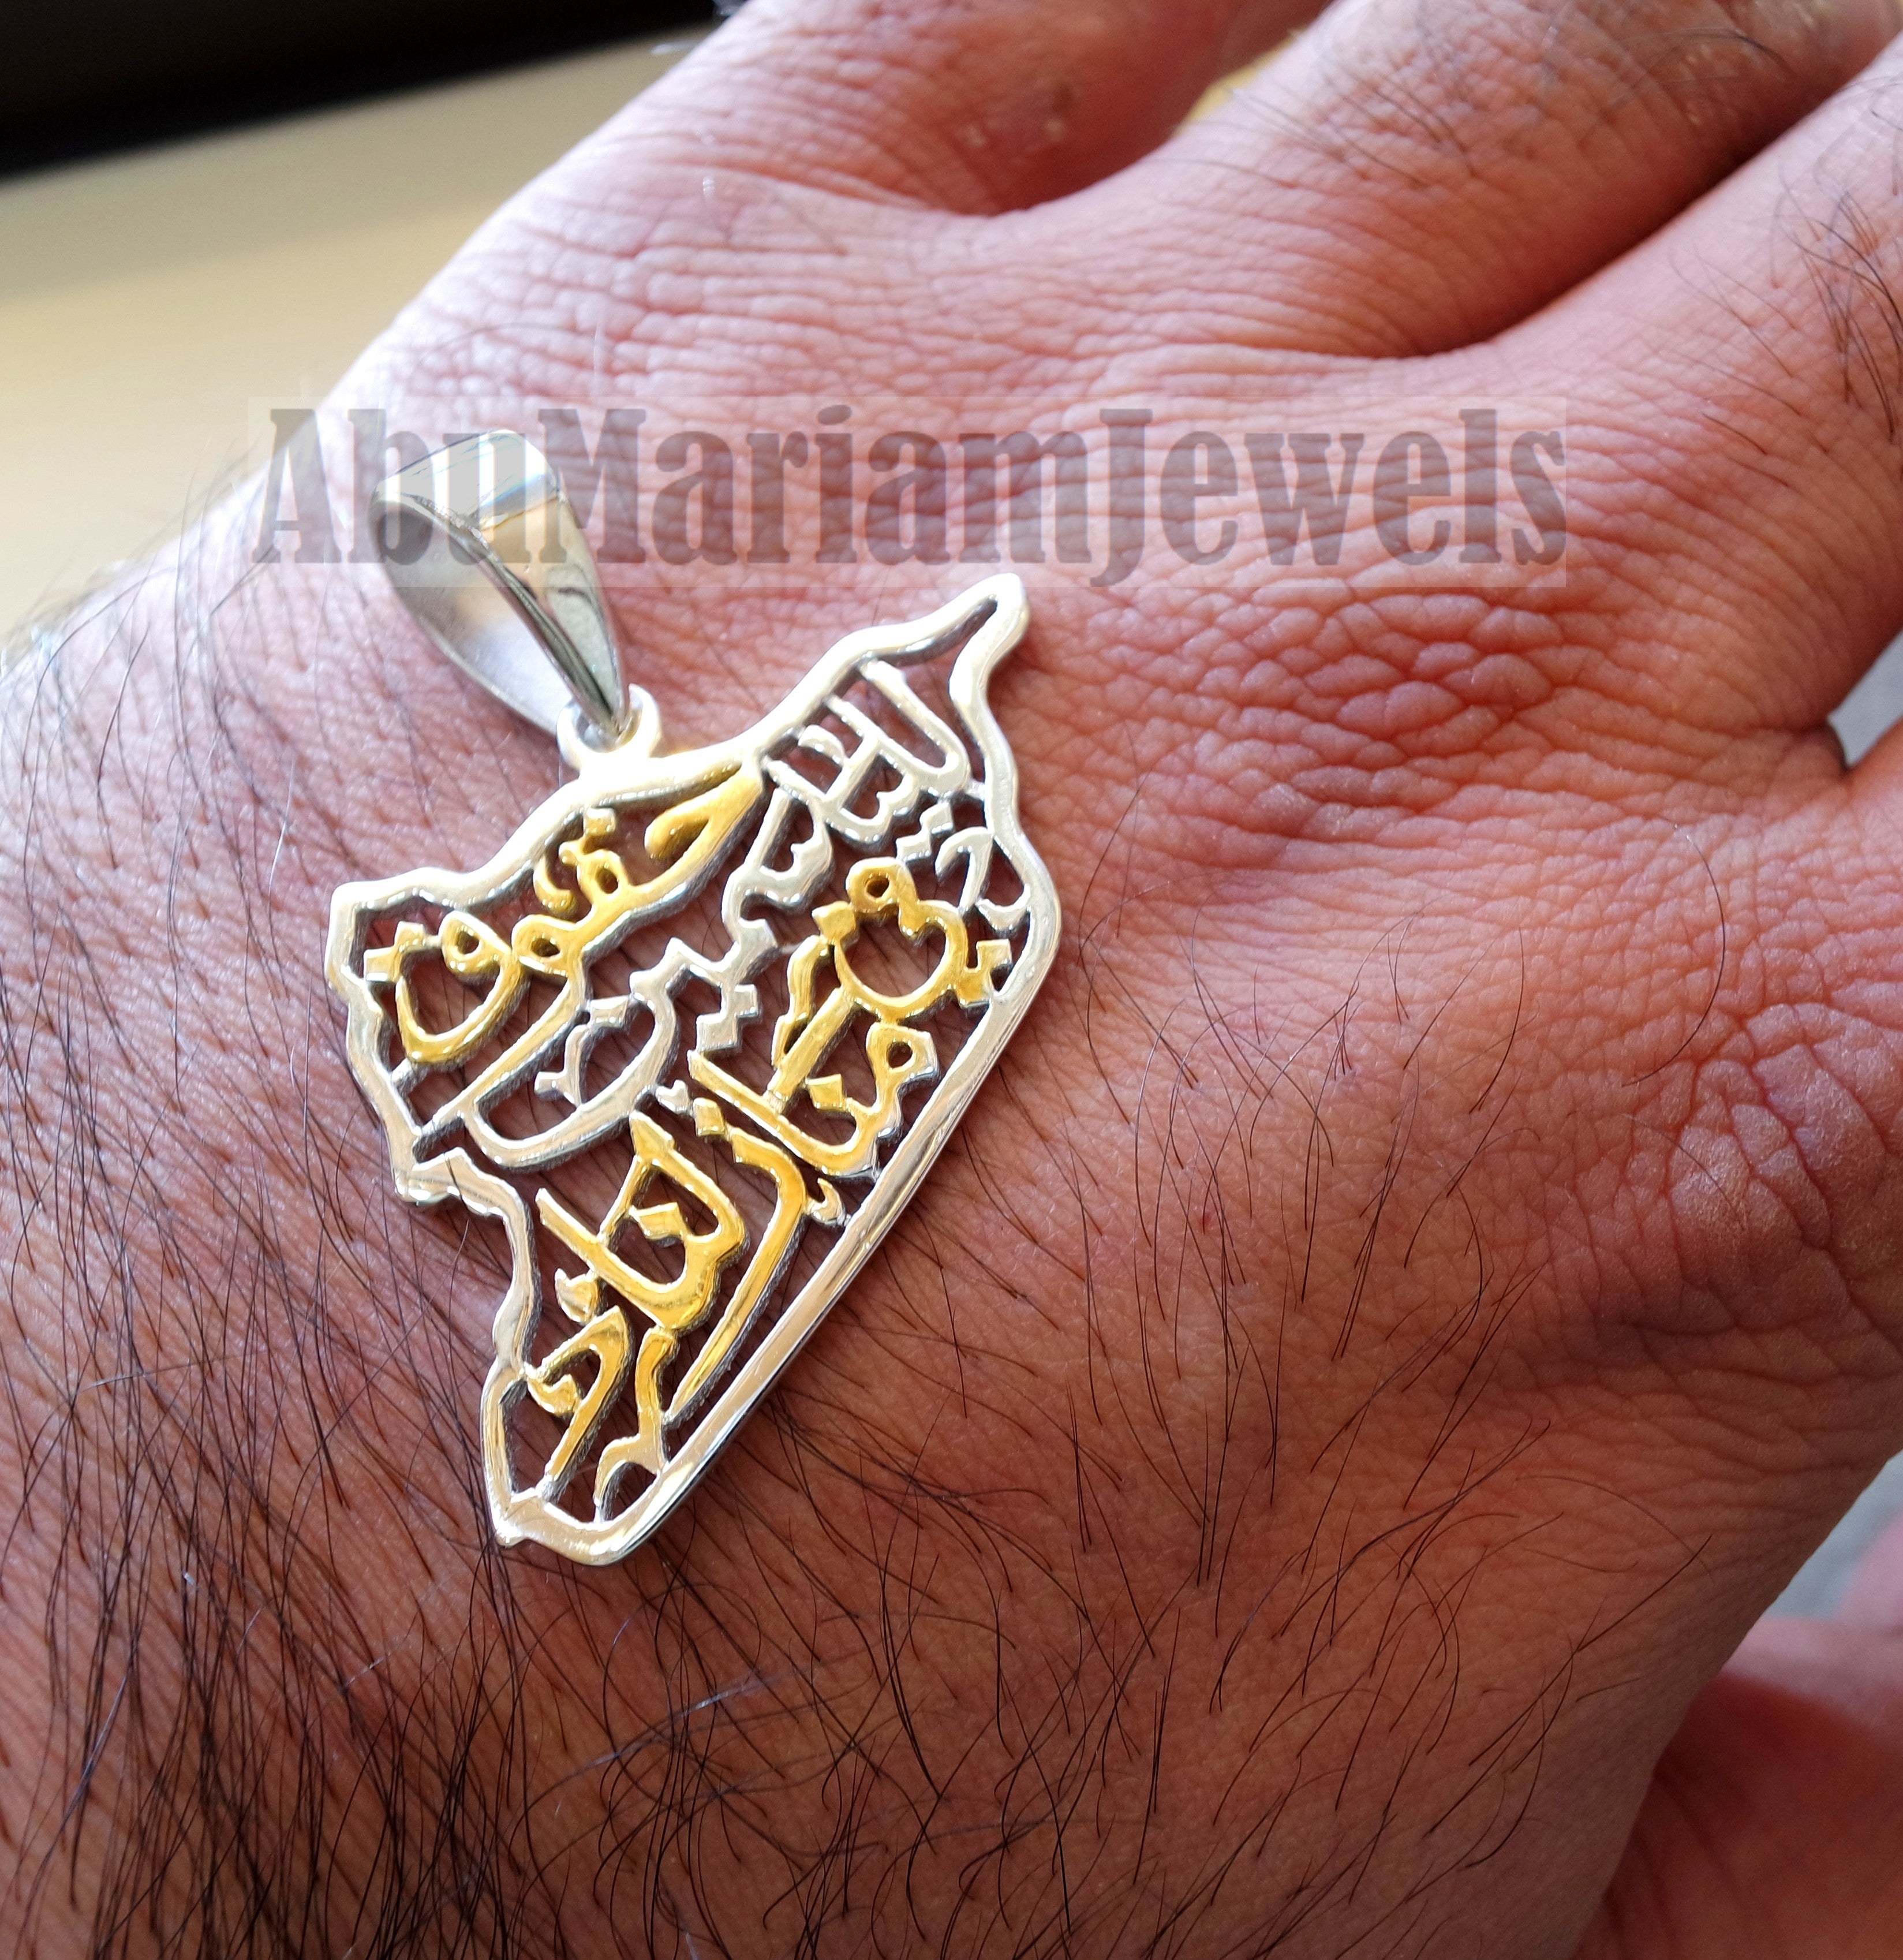 Syria map pendant  famous poem verse sterling silver 925 with 14k gold plating jewelry arabic fast shipping خارطه سوريا